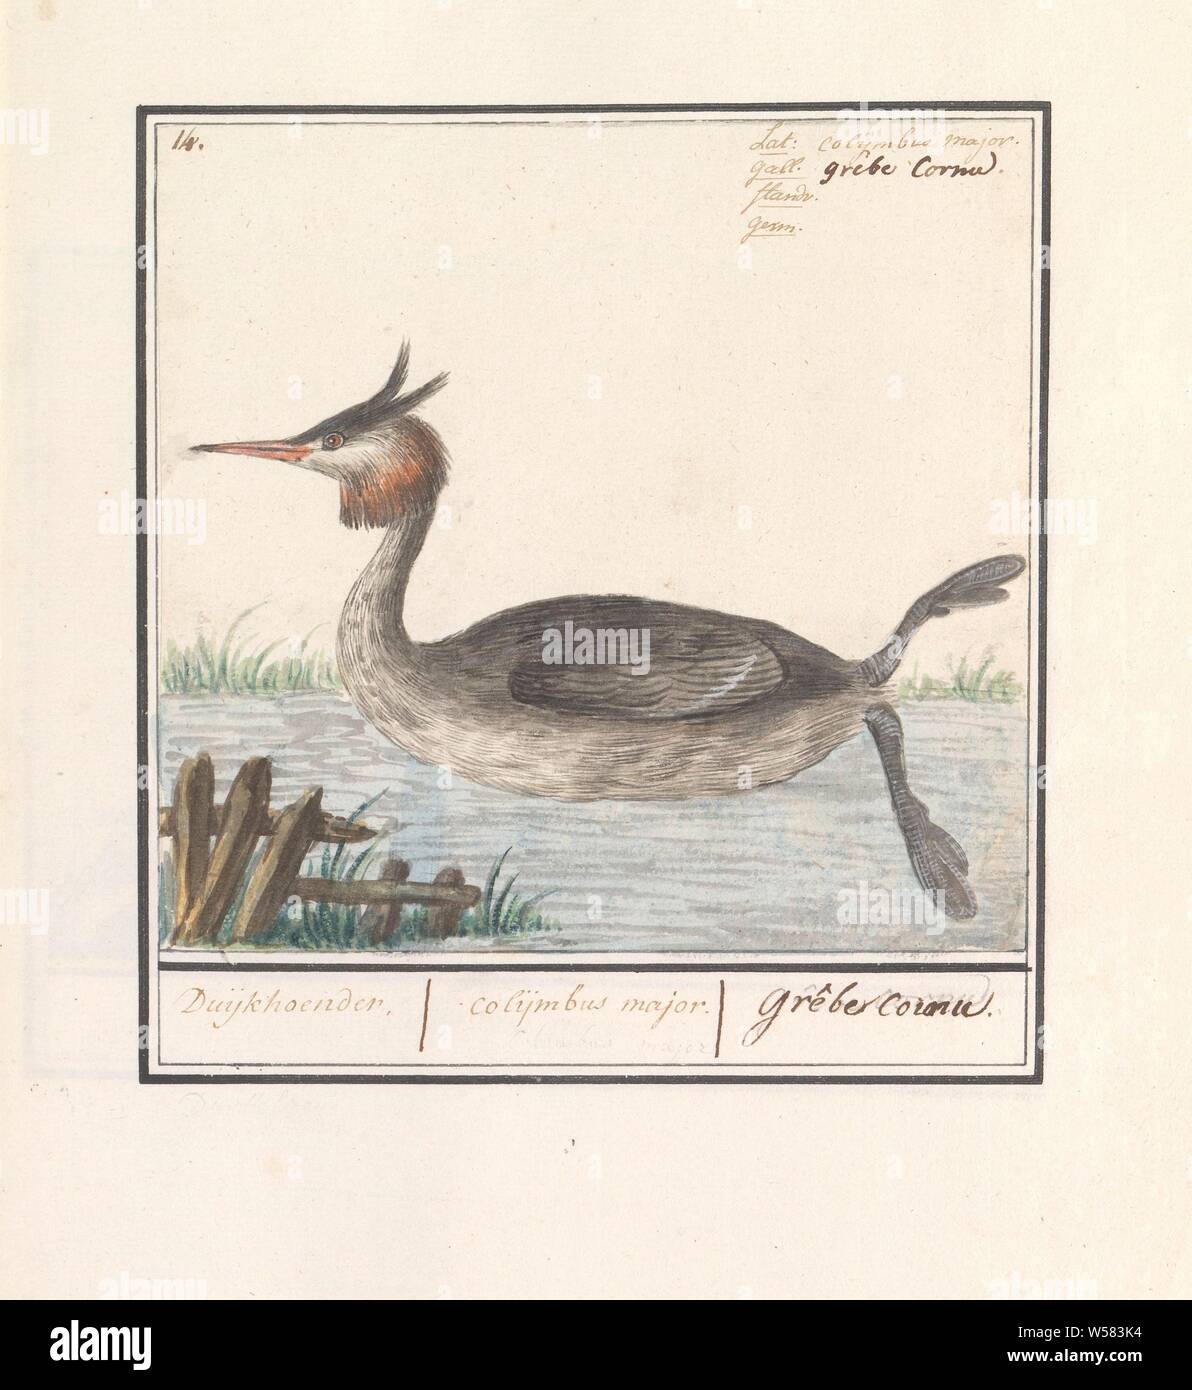 Grebe (Podiceps cristatus), Duijkhoender. / colijmbus major. / grêbe cornu. (title on object), Grebe. Numbered top left: 14. Top right the Latin and French name. Part of the third album with drawings of birds. Fifth of twelve albums with drawings of animals, birds and plants known around 1600, commissioned by Emperor Rudolf II. With explanation in Dutch, Latin and French, Anselmus Boetius de Boodt, 1596 - 1610, paper, watercolor (paint), deck paint, pencil, chalk, ink, pen, h 164 mm × w 171 mm Stock Photo